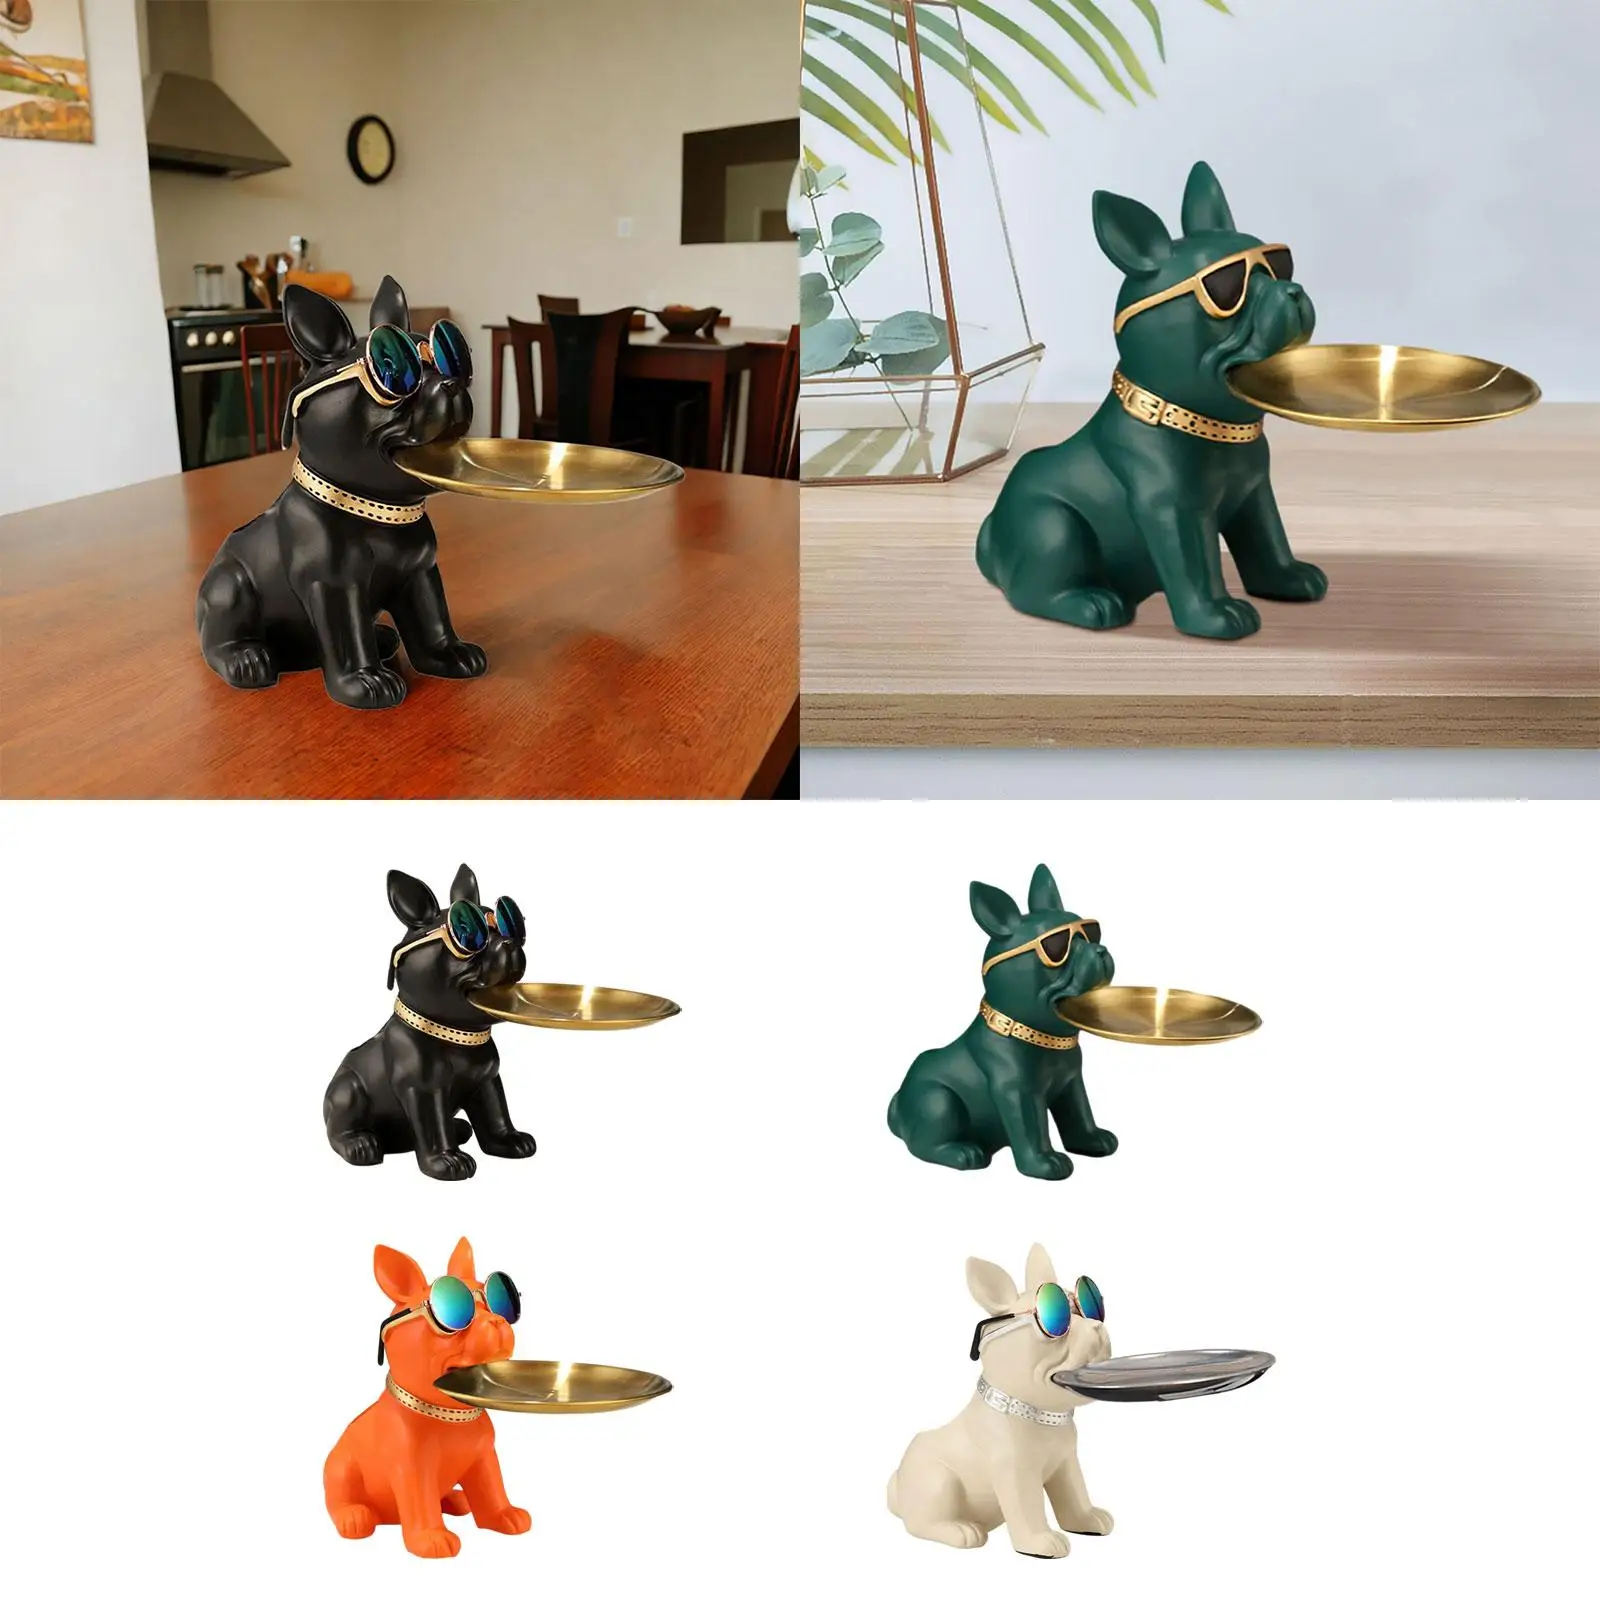 Bulldog Statue Nordic Modern Multifunction Cute Animal Figurine Candy Bowl for Office Tabletop Entrance Bedroom Home Decoration